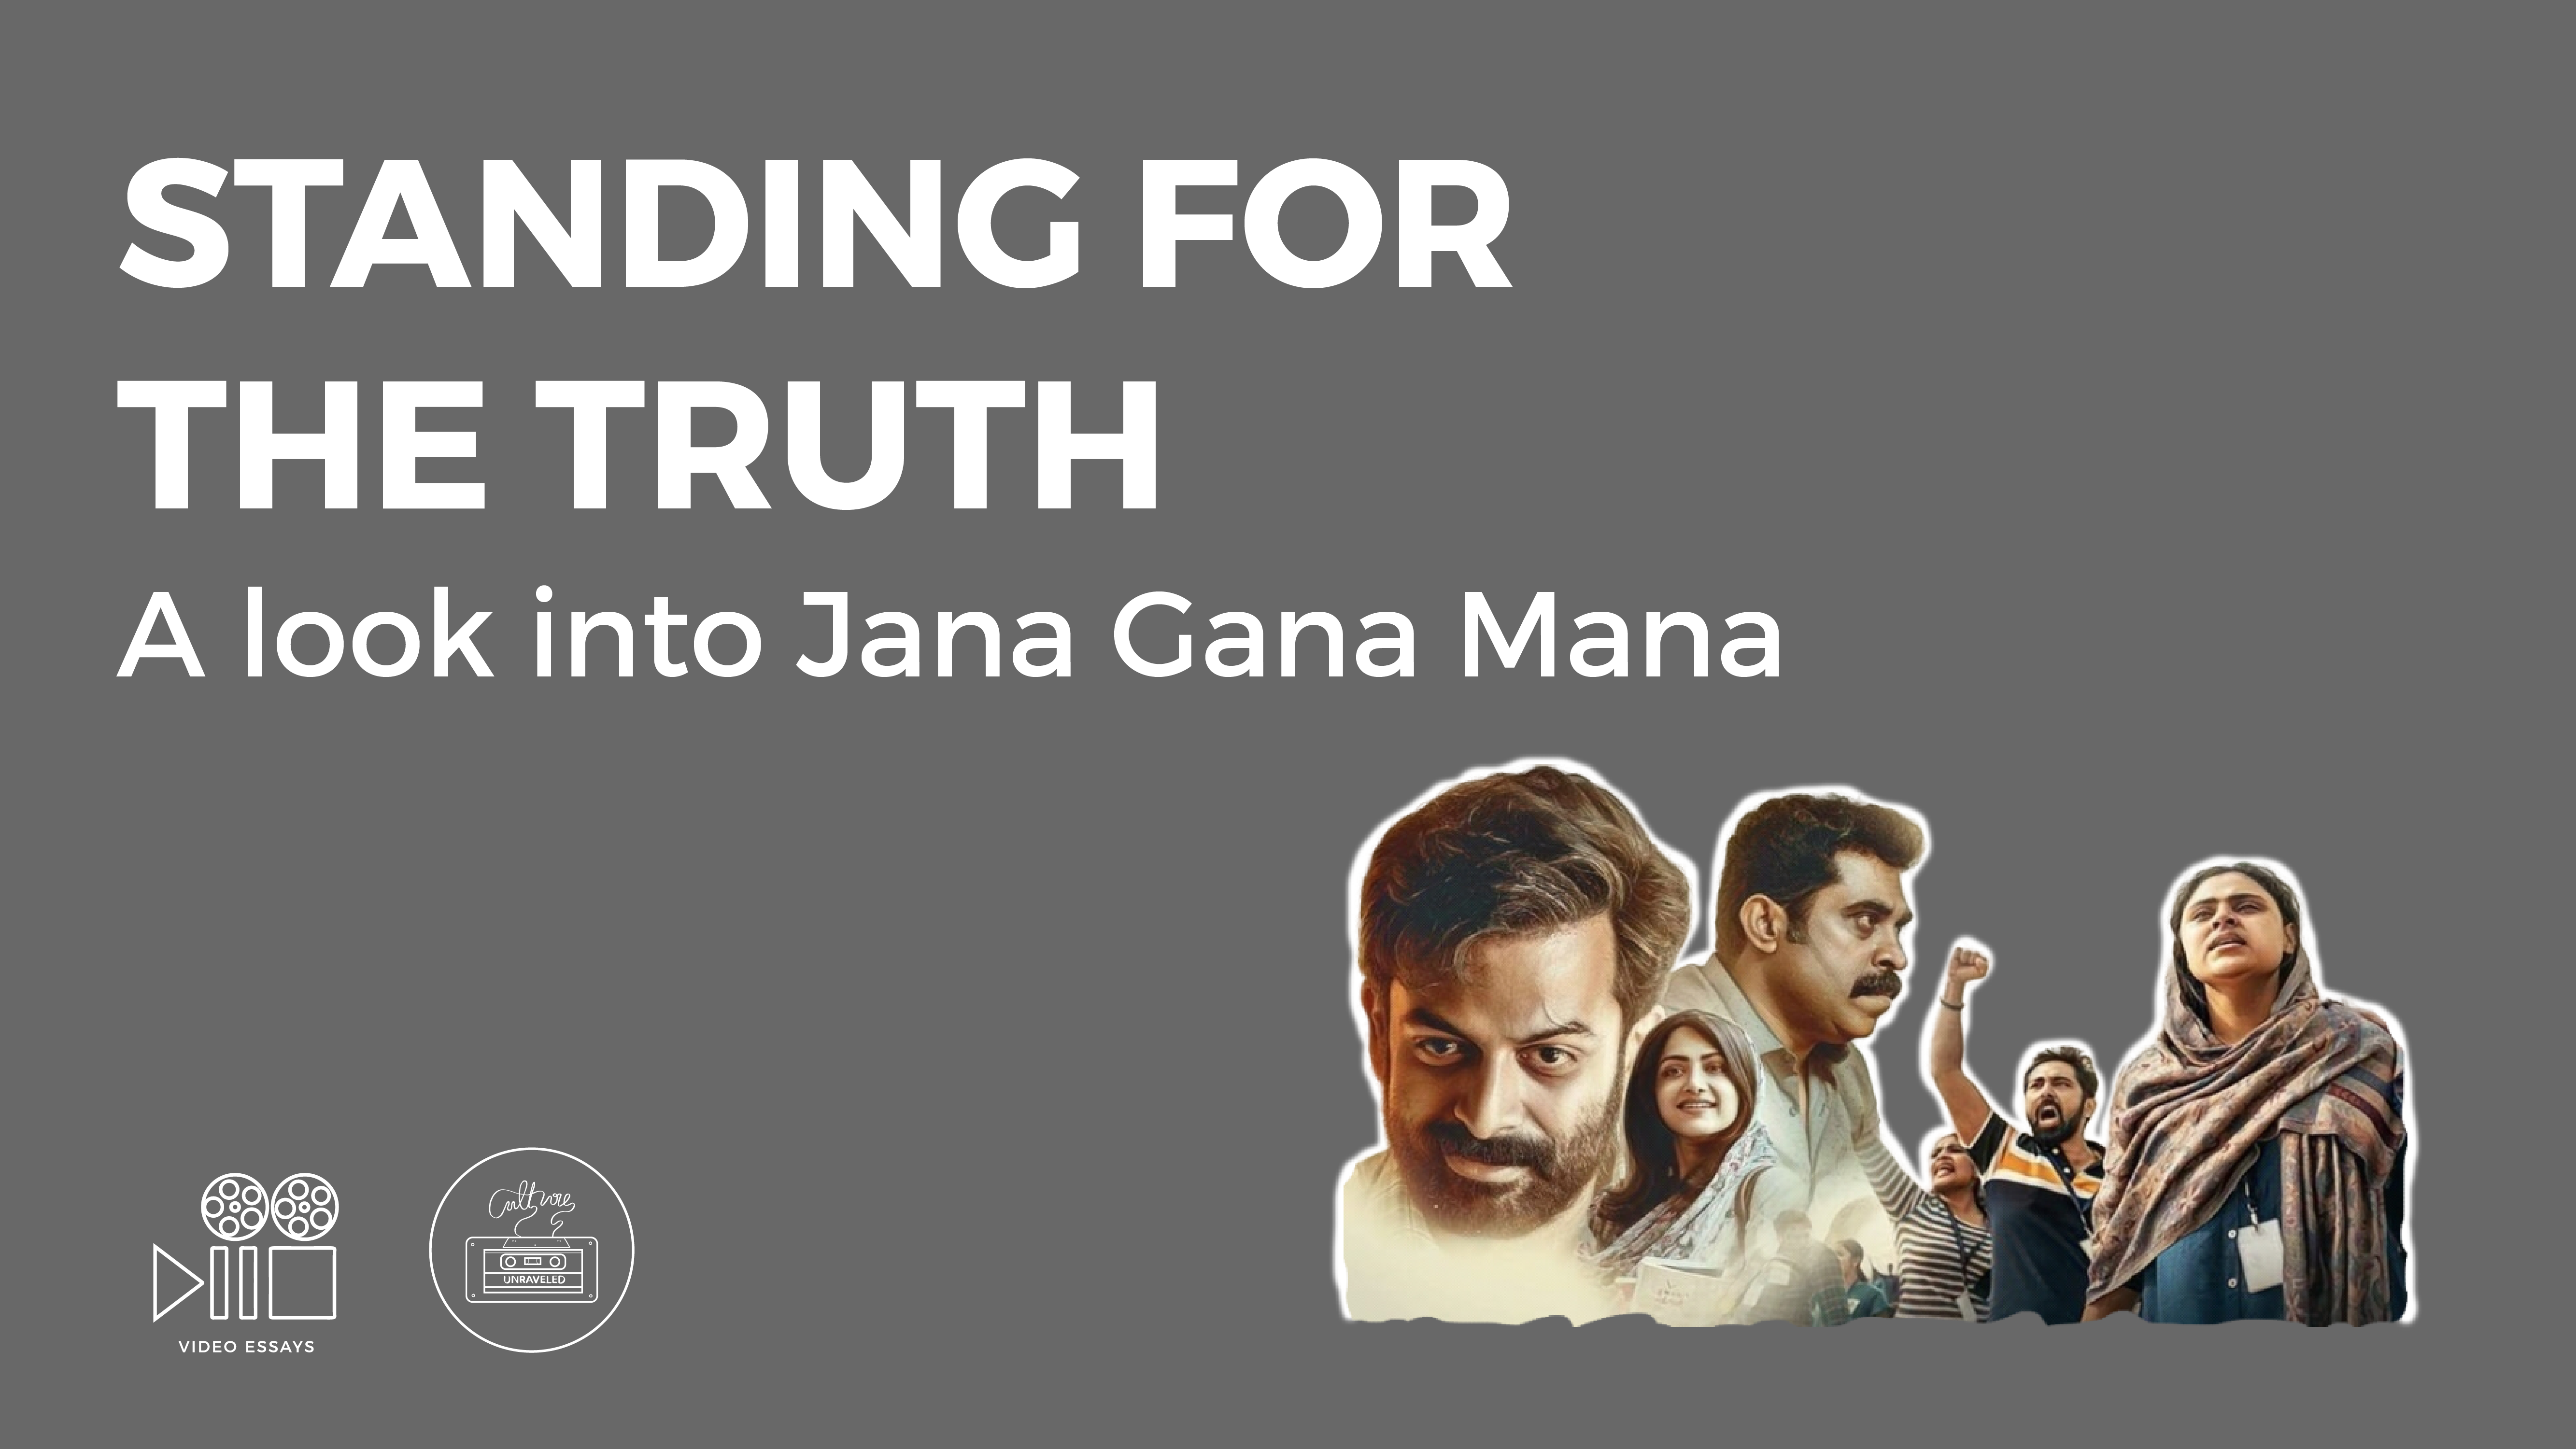 Standing for the Truth. A Look into Jana Gana Mana